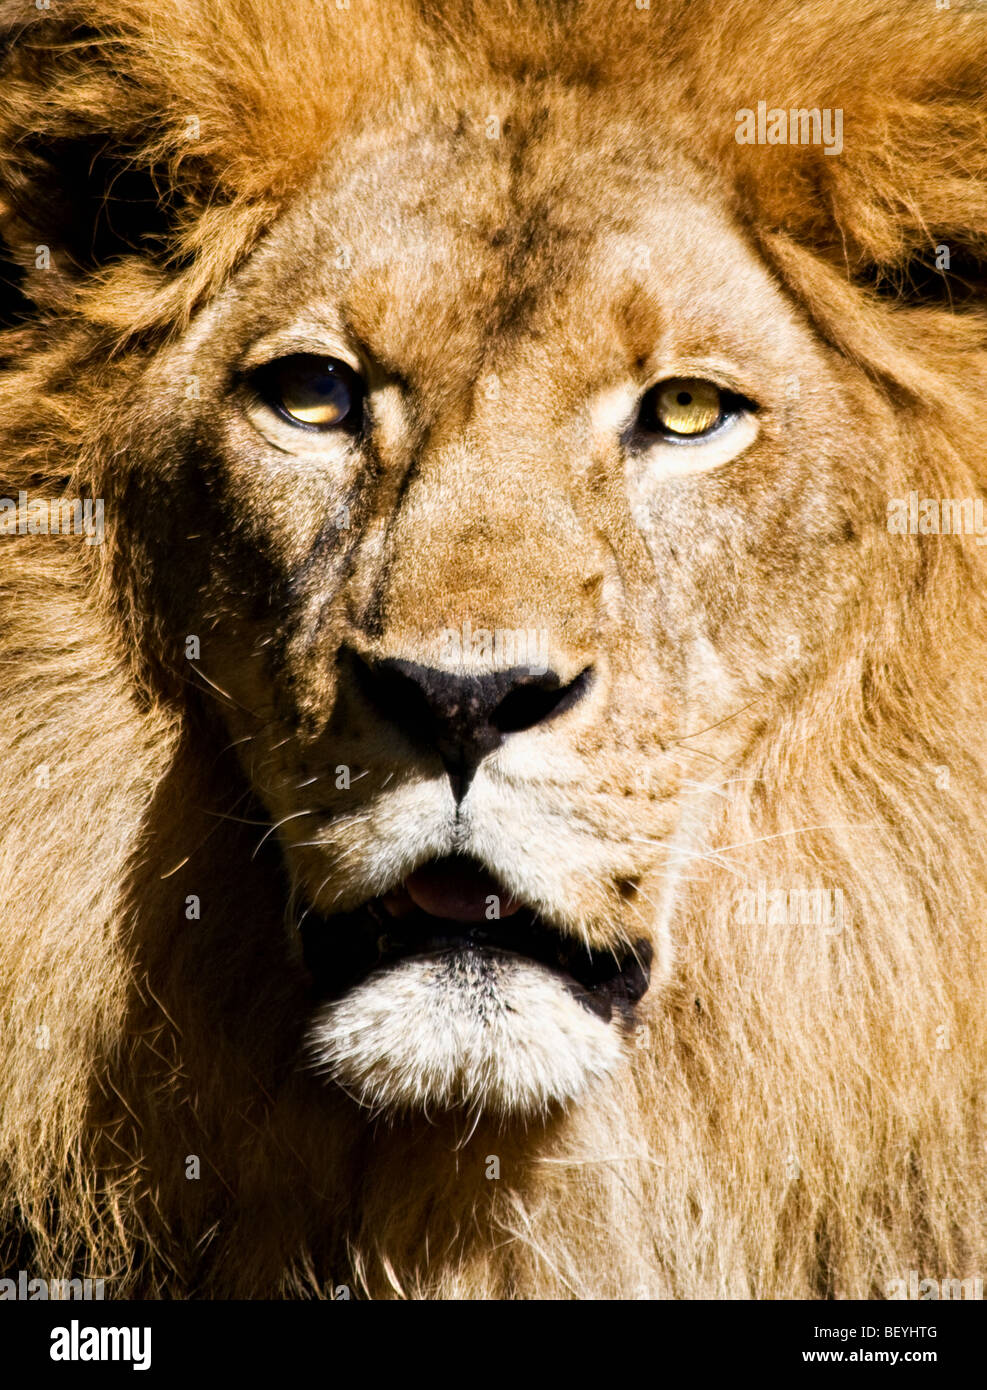 The 'portrait' of an 'African lion' at the 'Los Angeles Zoo' in 'Los Angeles, California.' Stock Photo